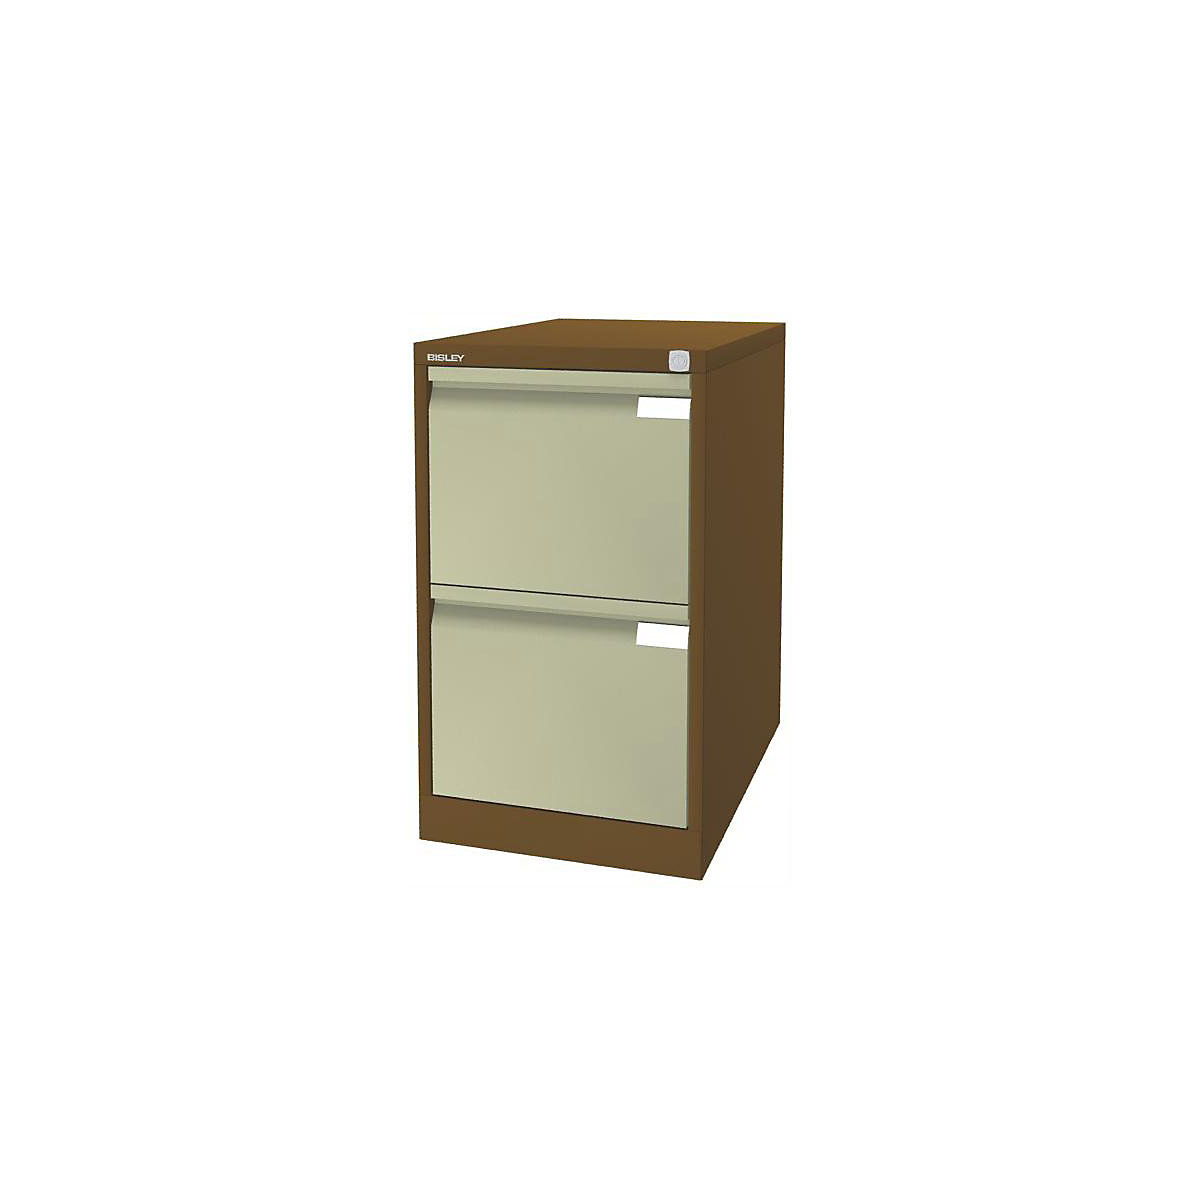 Suspension file cabinet, 1-track – BISLEY, 2 A4 drawers, sepia brown/creme-14